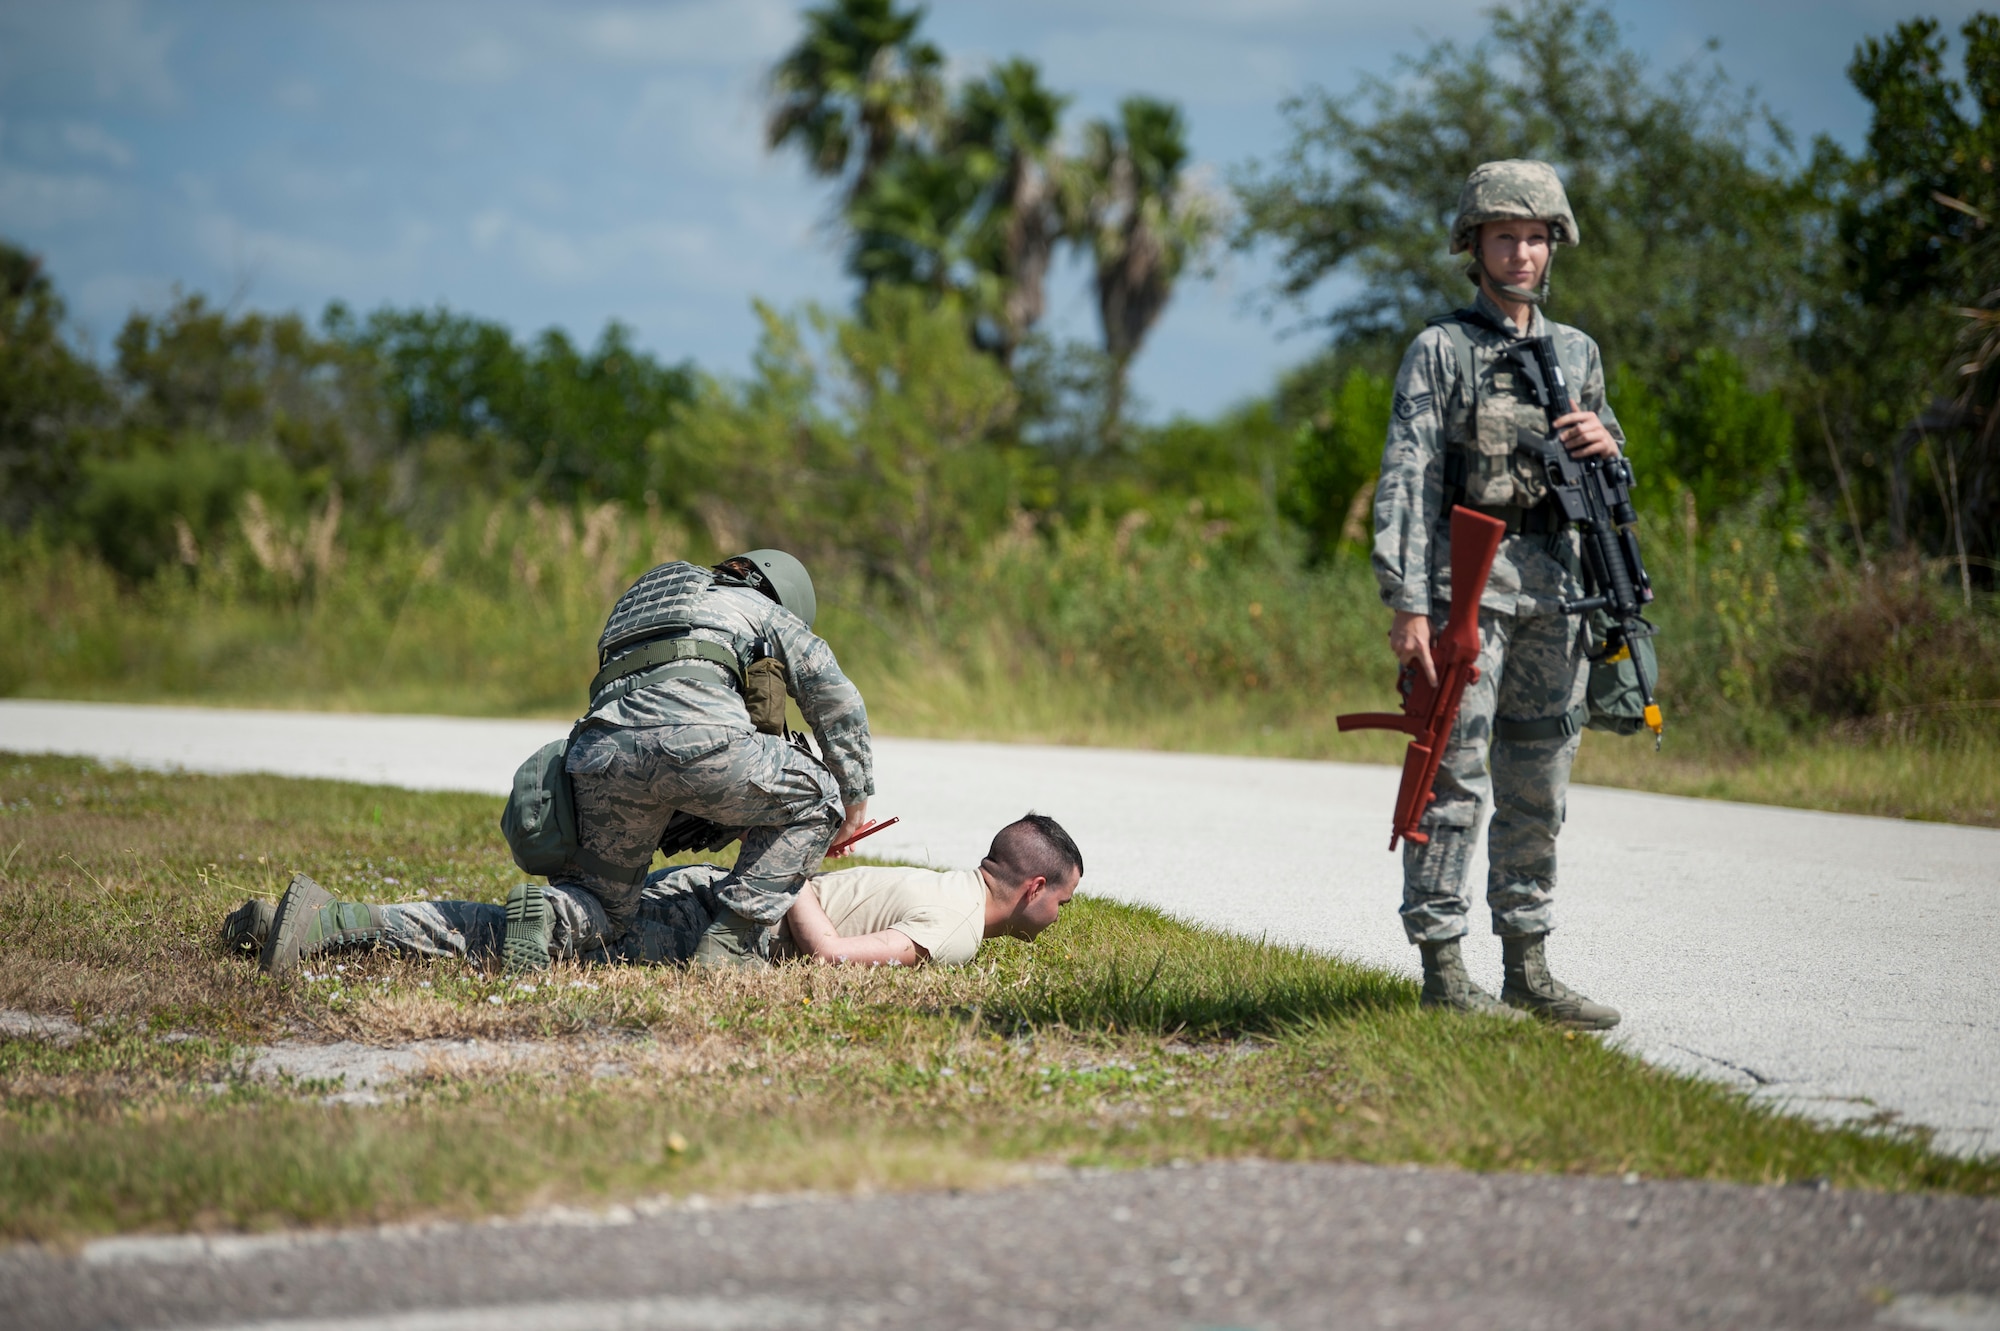 6th Security Forces Squadron defenders detain an mock intruder at a simulated forward operating position during a 6th Air Mobility Wing operational readiness assessment (ORA), Oct. 4, 2018 at MacDill Air Force Base, Fla.